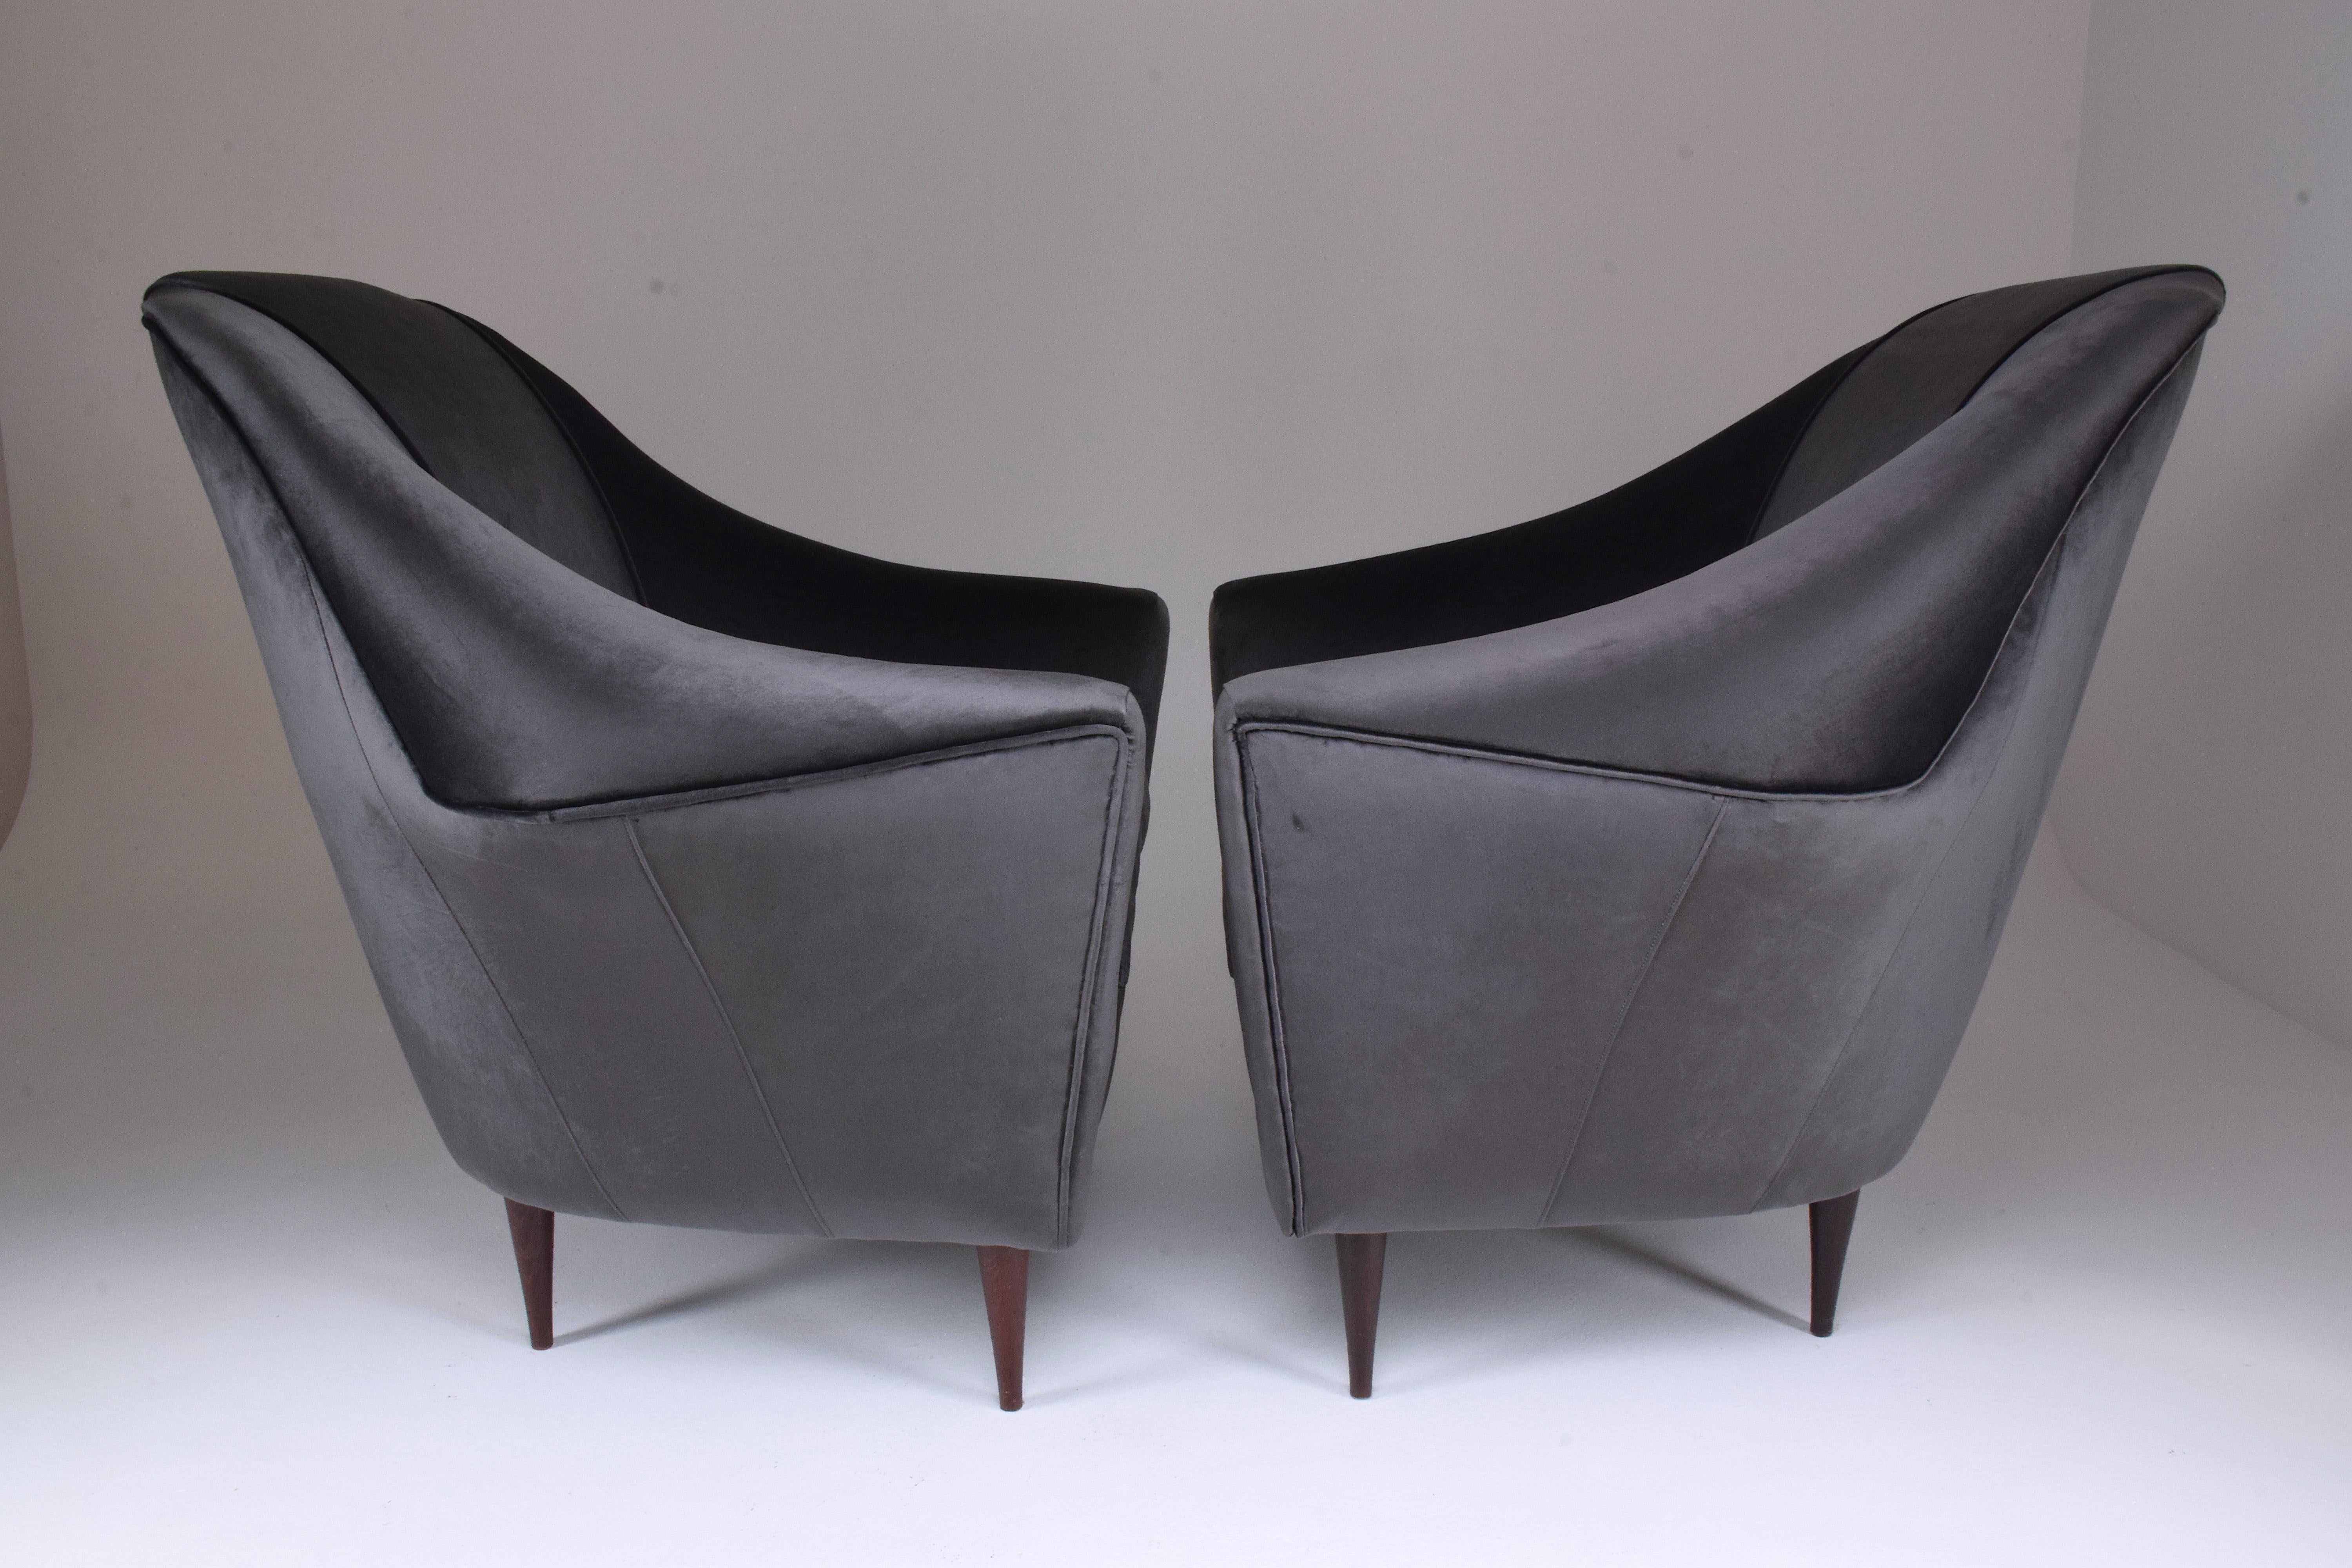 20th Century Ico Parisi Armchairs for Ariberto Colombo, Set of Two, 1950s For Sale 5